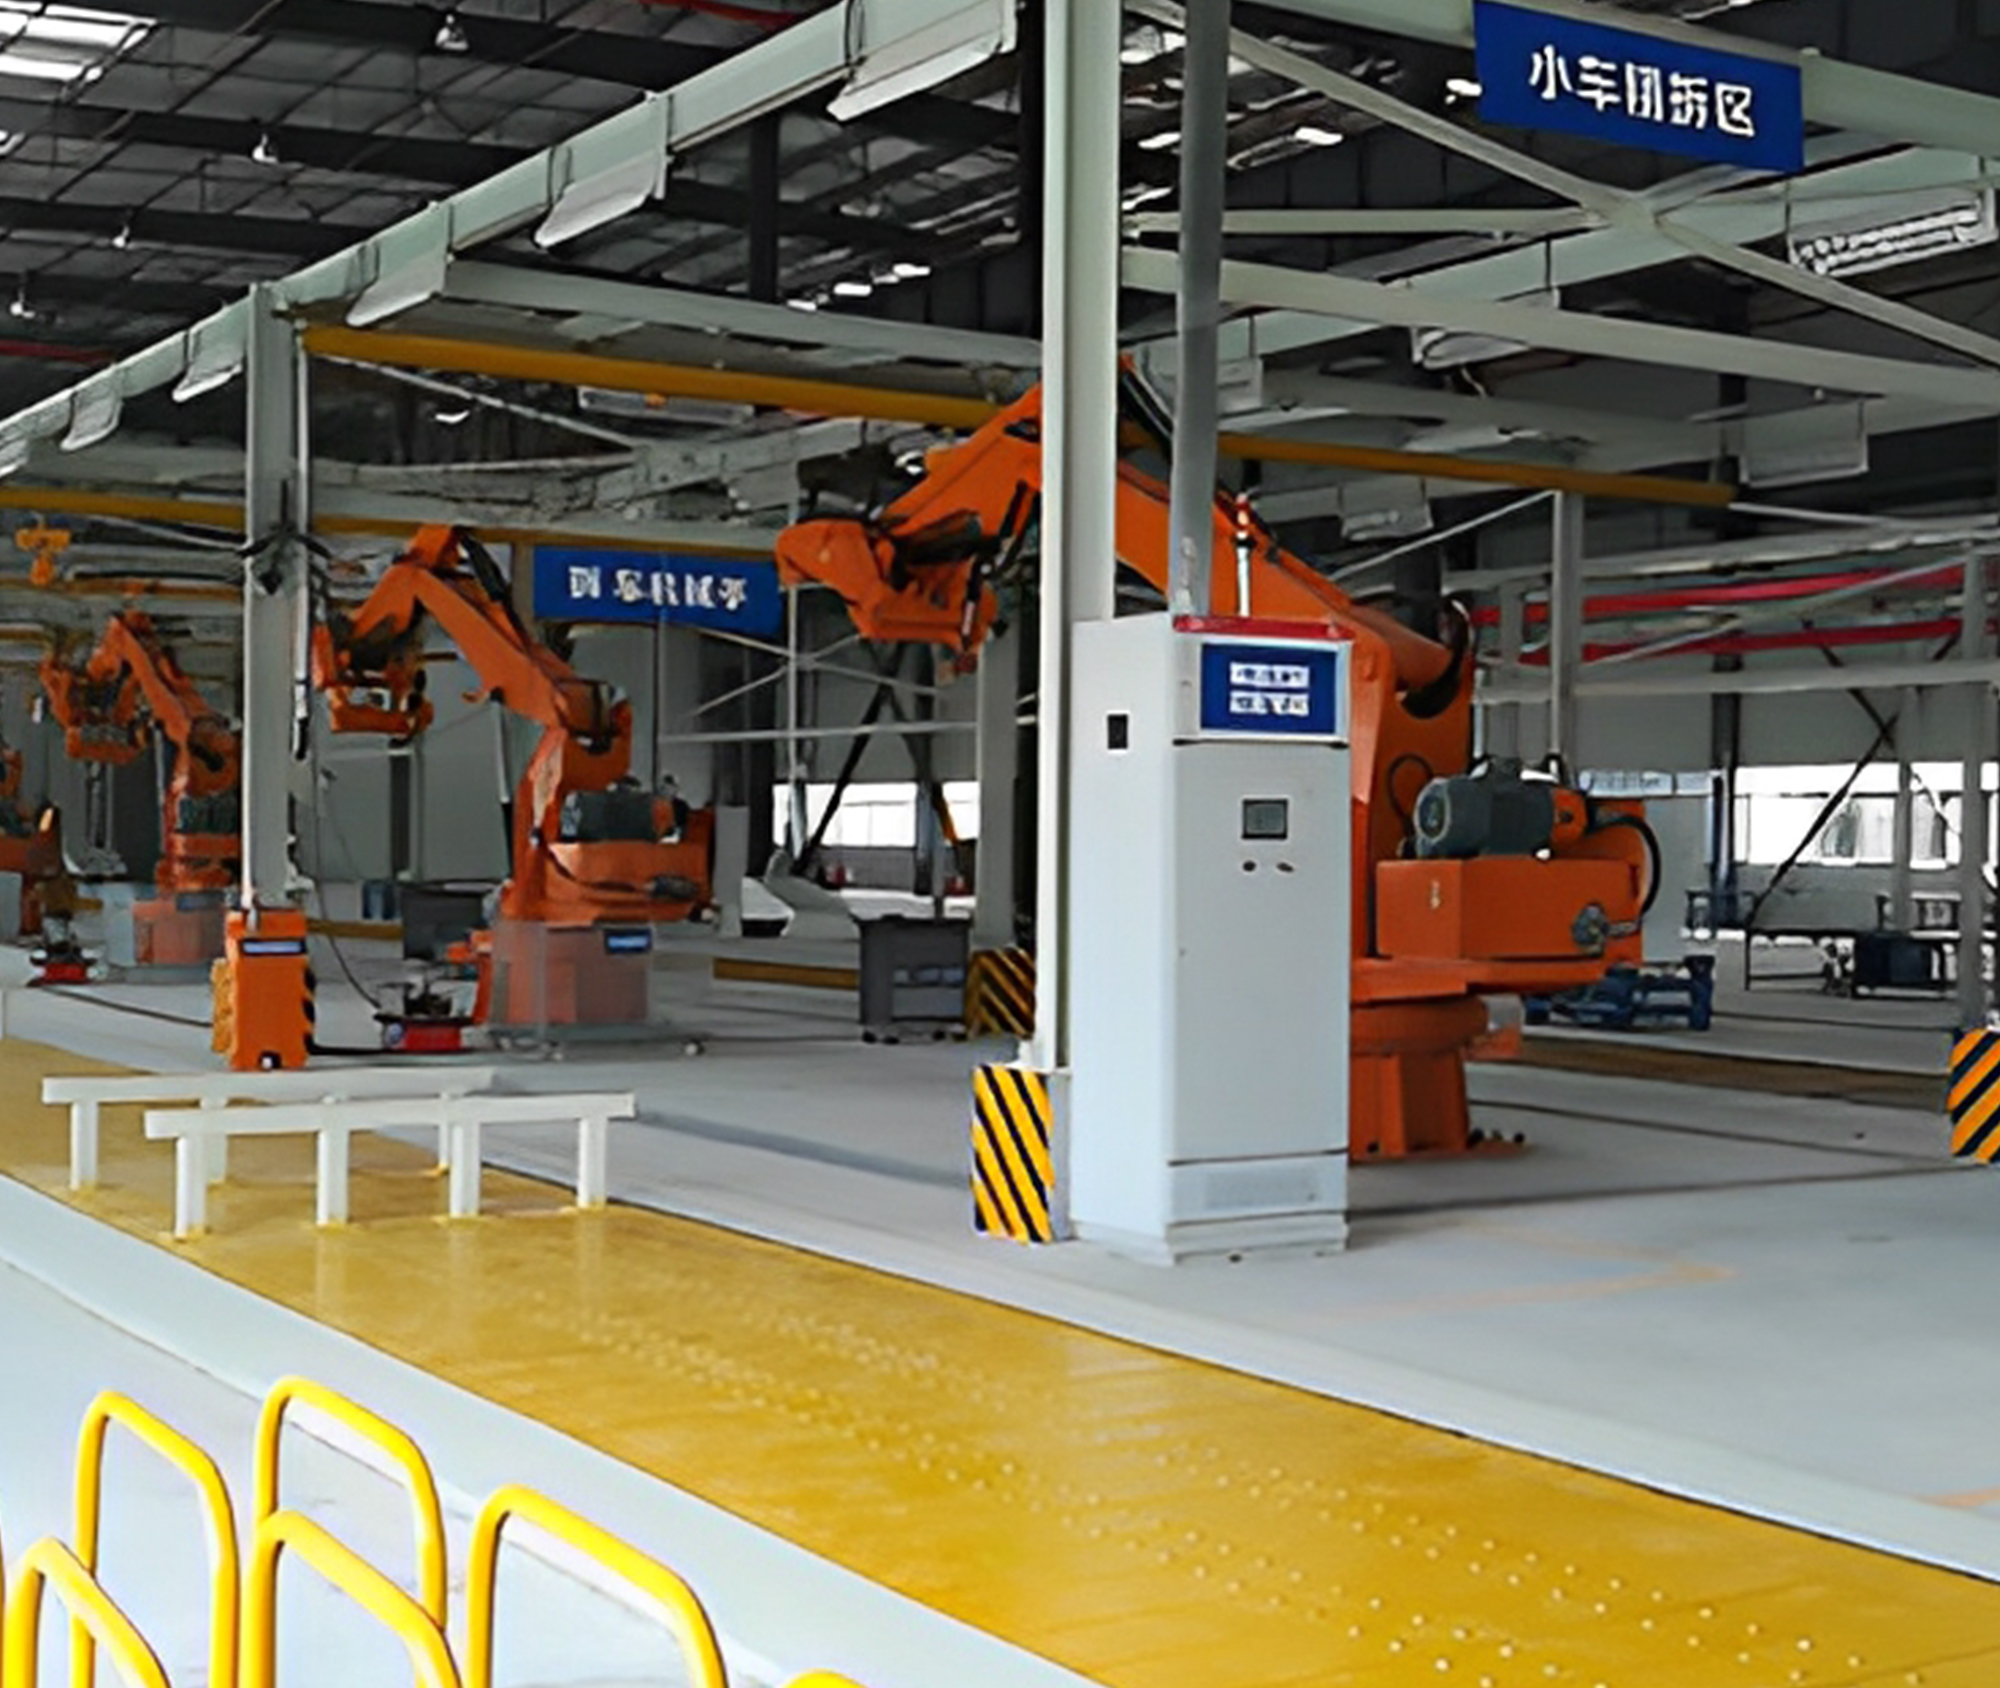 Guangdong Plate Link Chain+Manipulator Dismantle Line